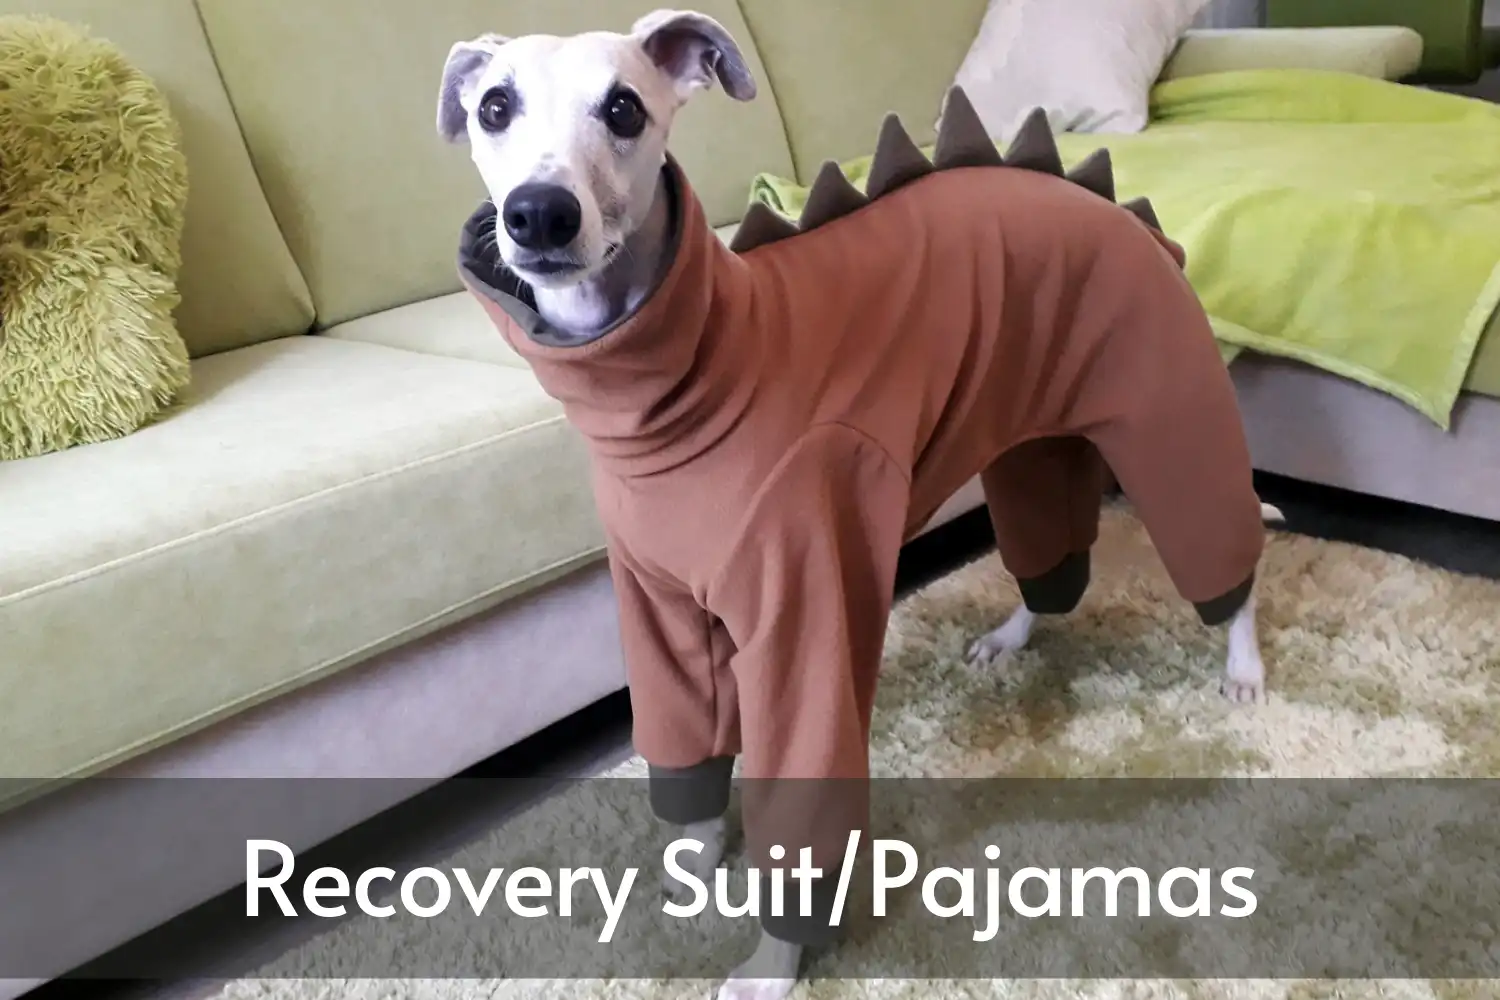 How Long Does Dog Wear Cone after Neuter? - Alternatives to the plastic cone - Recovery Suit/Pajamas